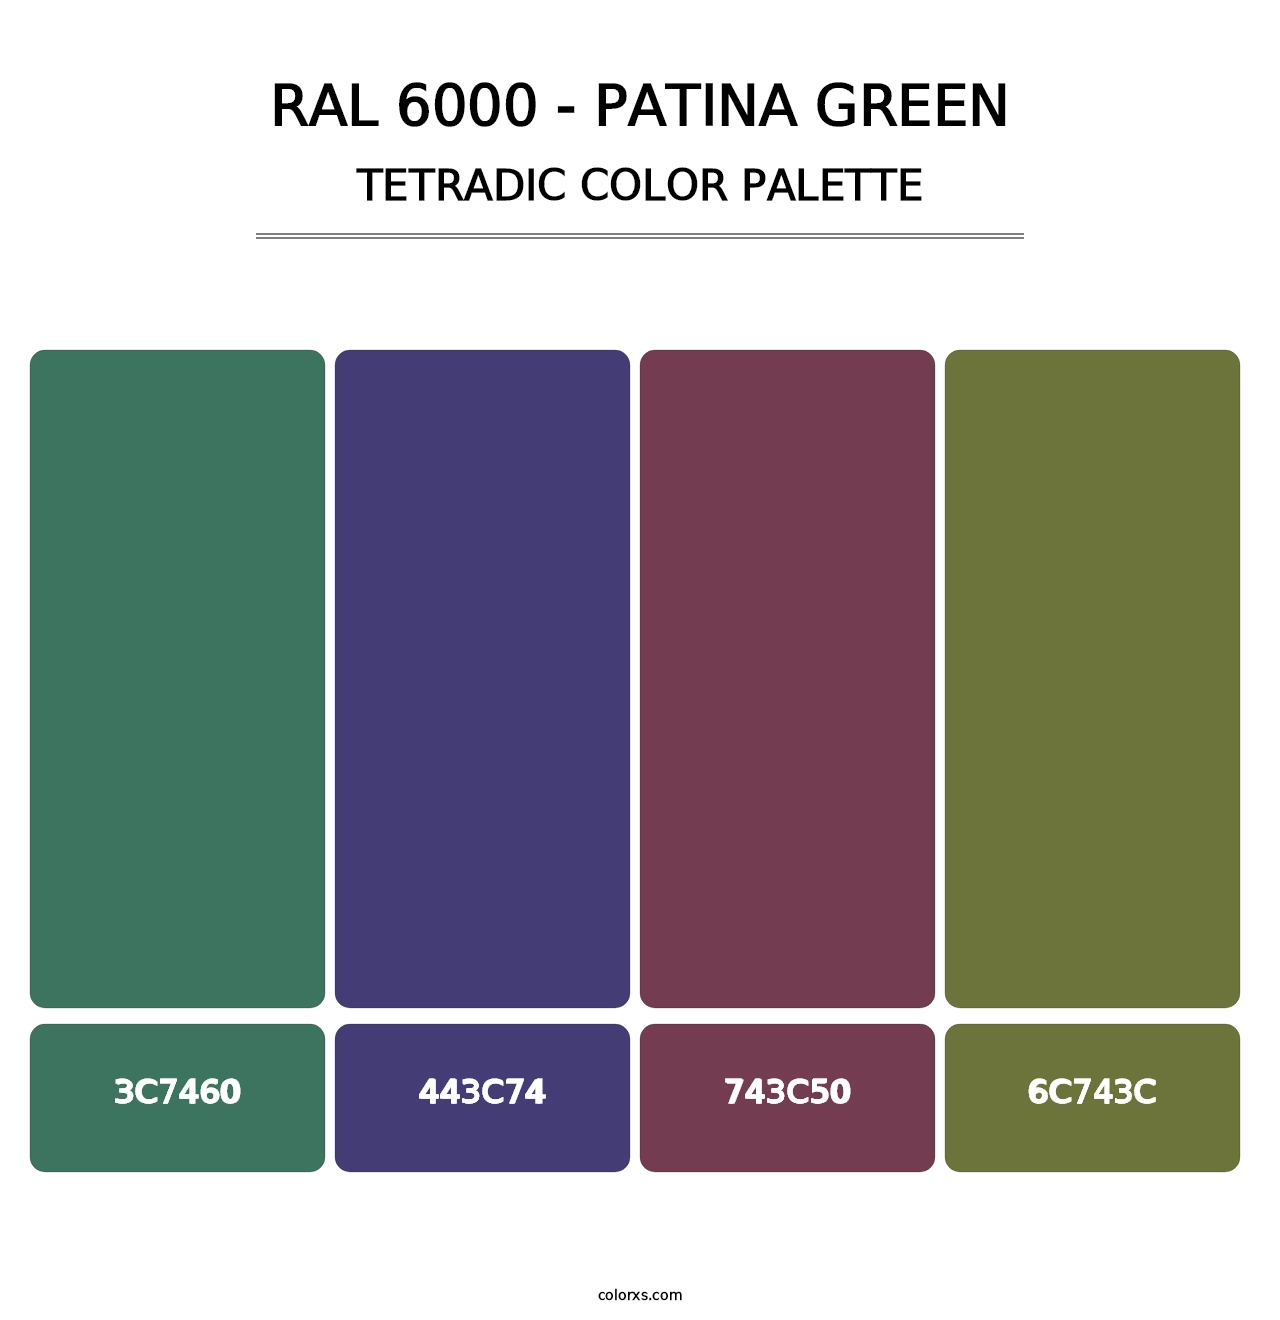 RAL 6000 - Patina Green - Tetradic Color Palette